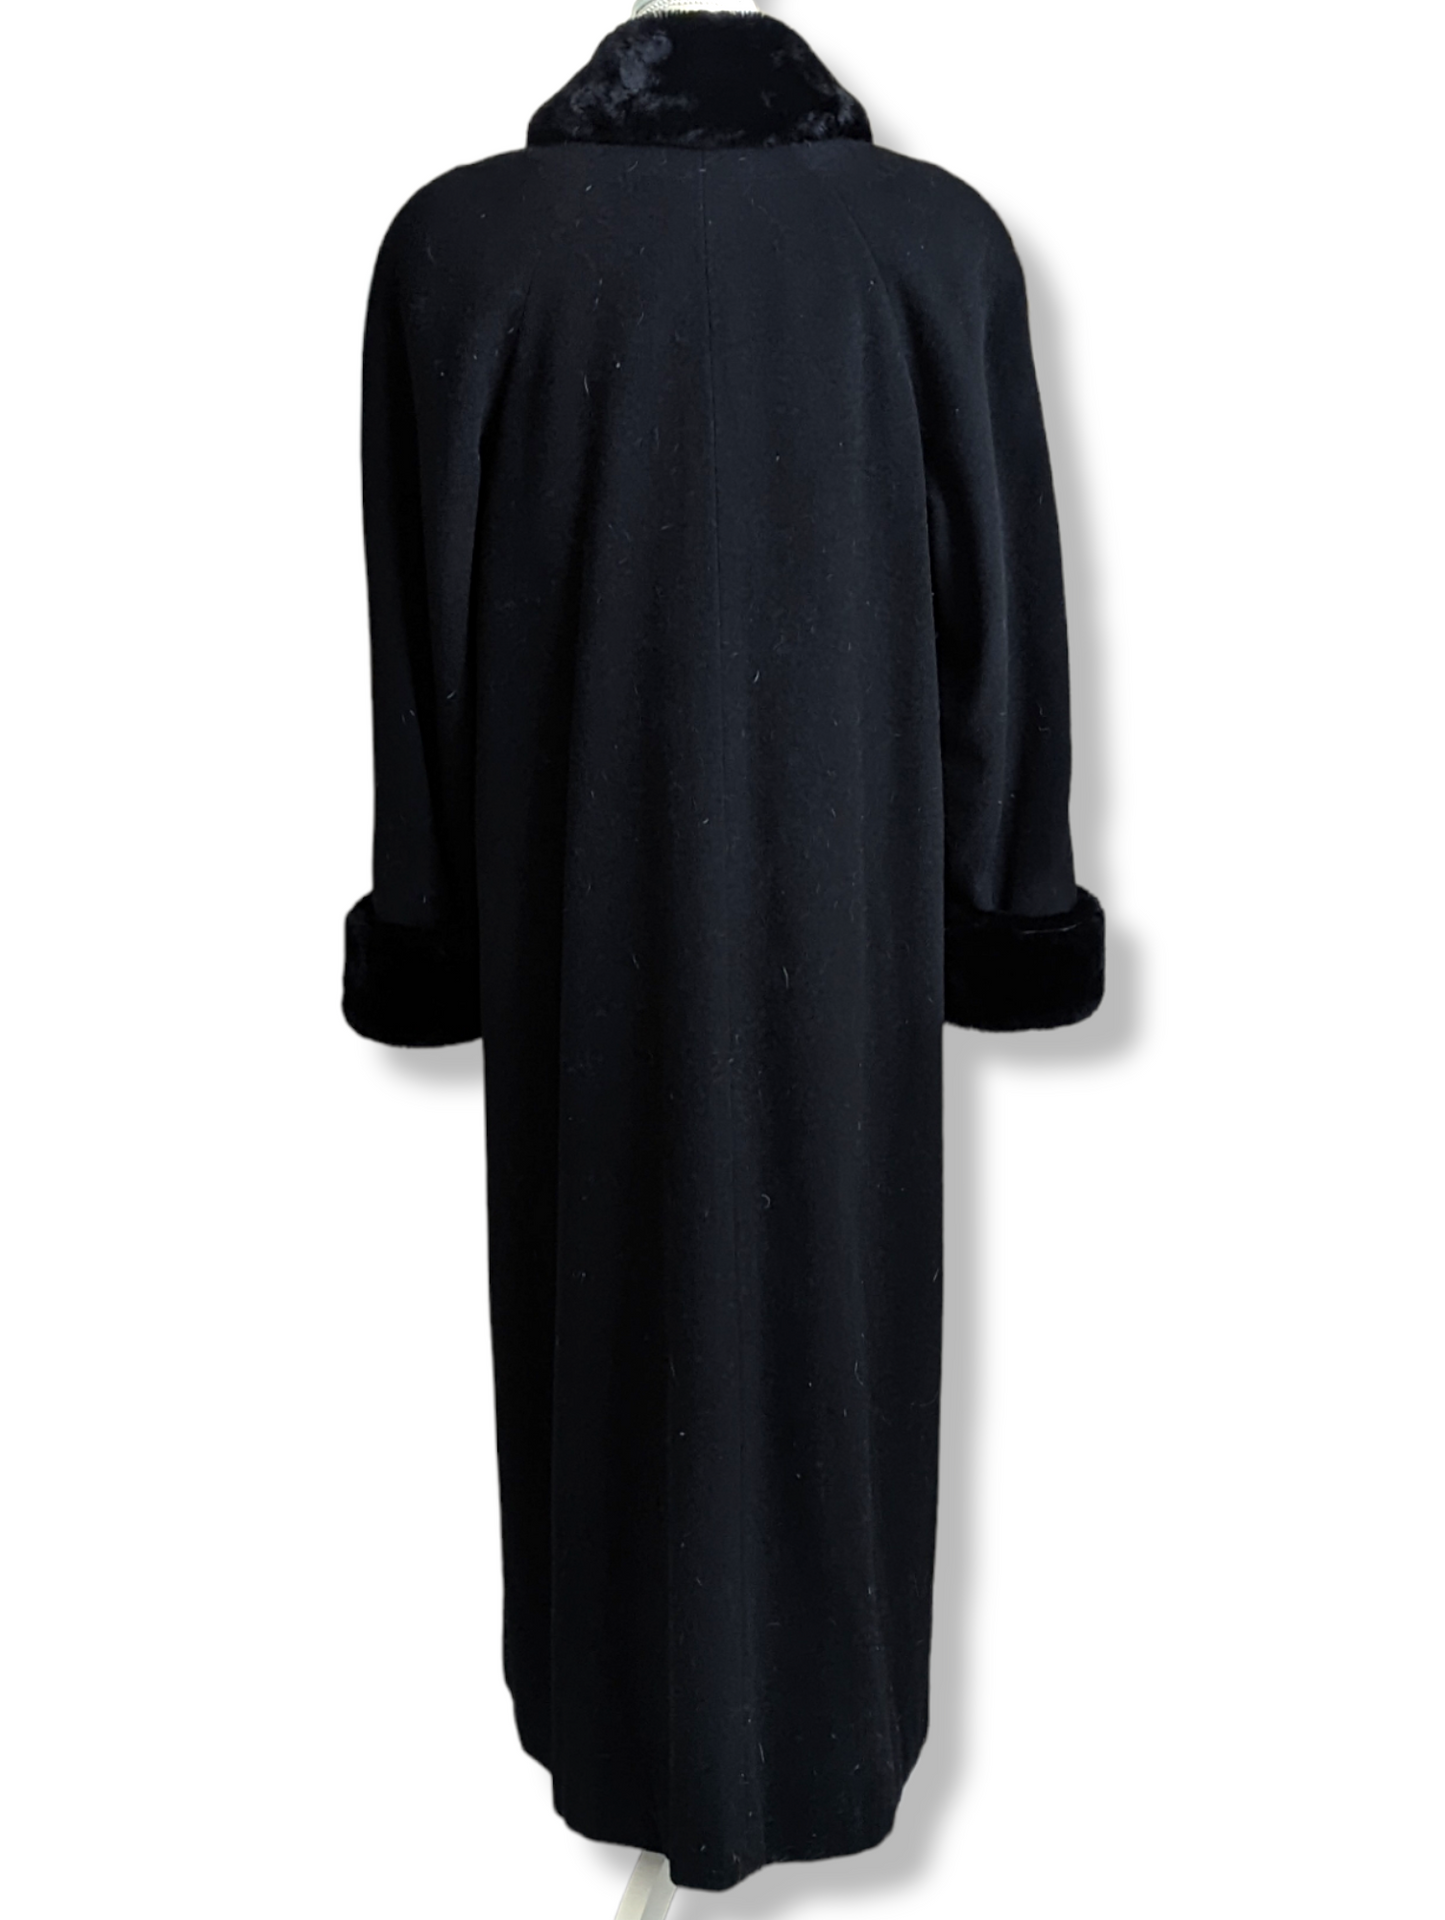 1960s/1970s Black Wool and Cashmere Long Coat with Faux Fur Cuffs and Collar and Velour Velvet Button